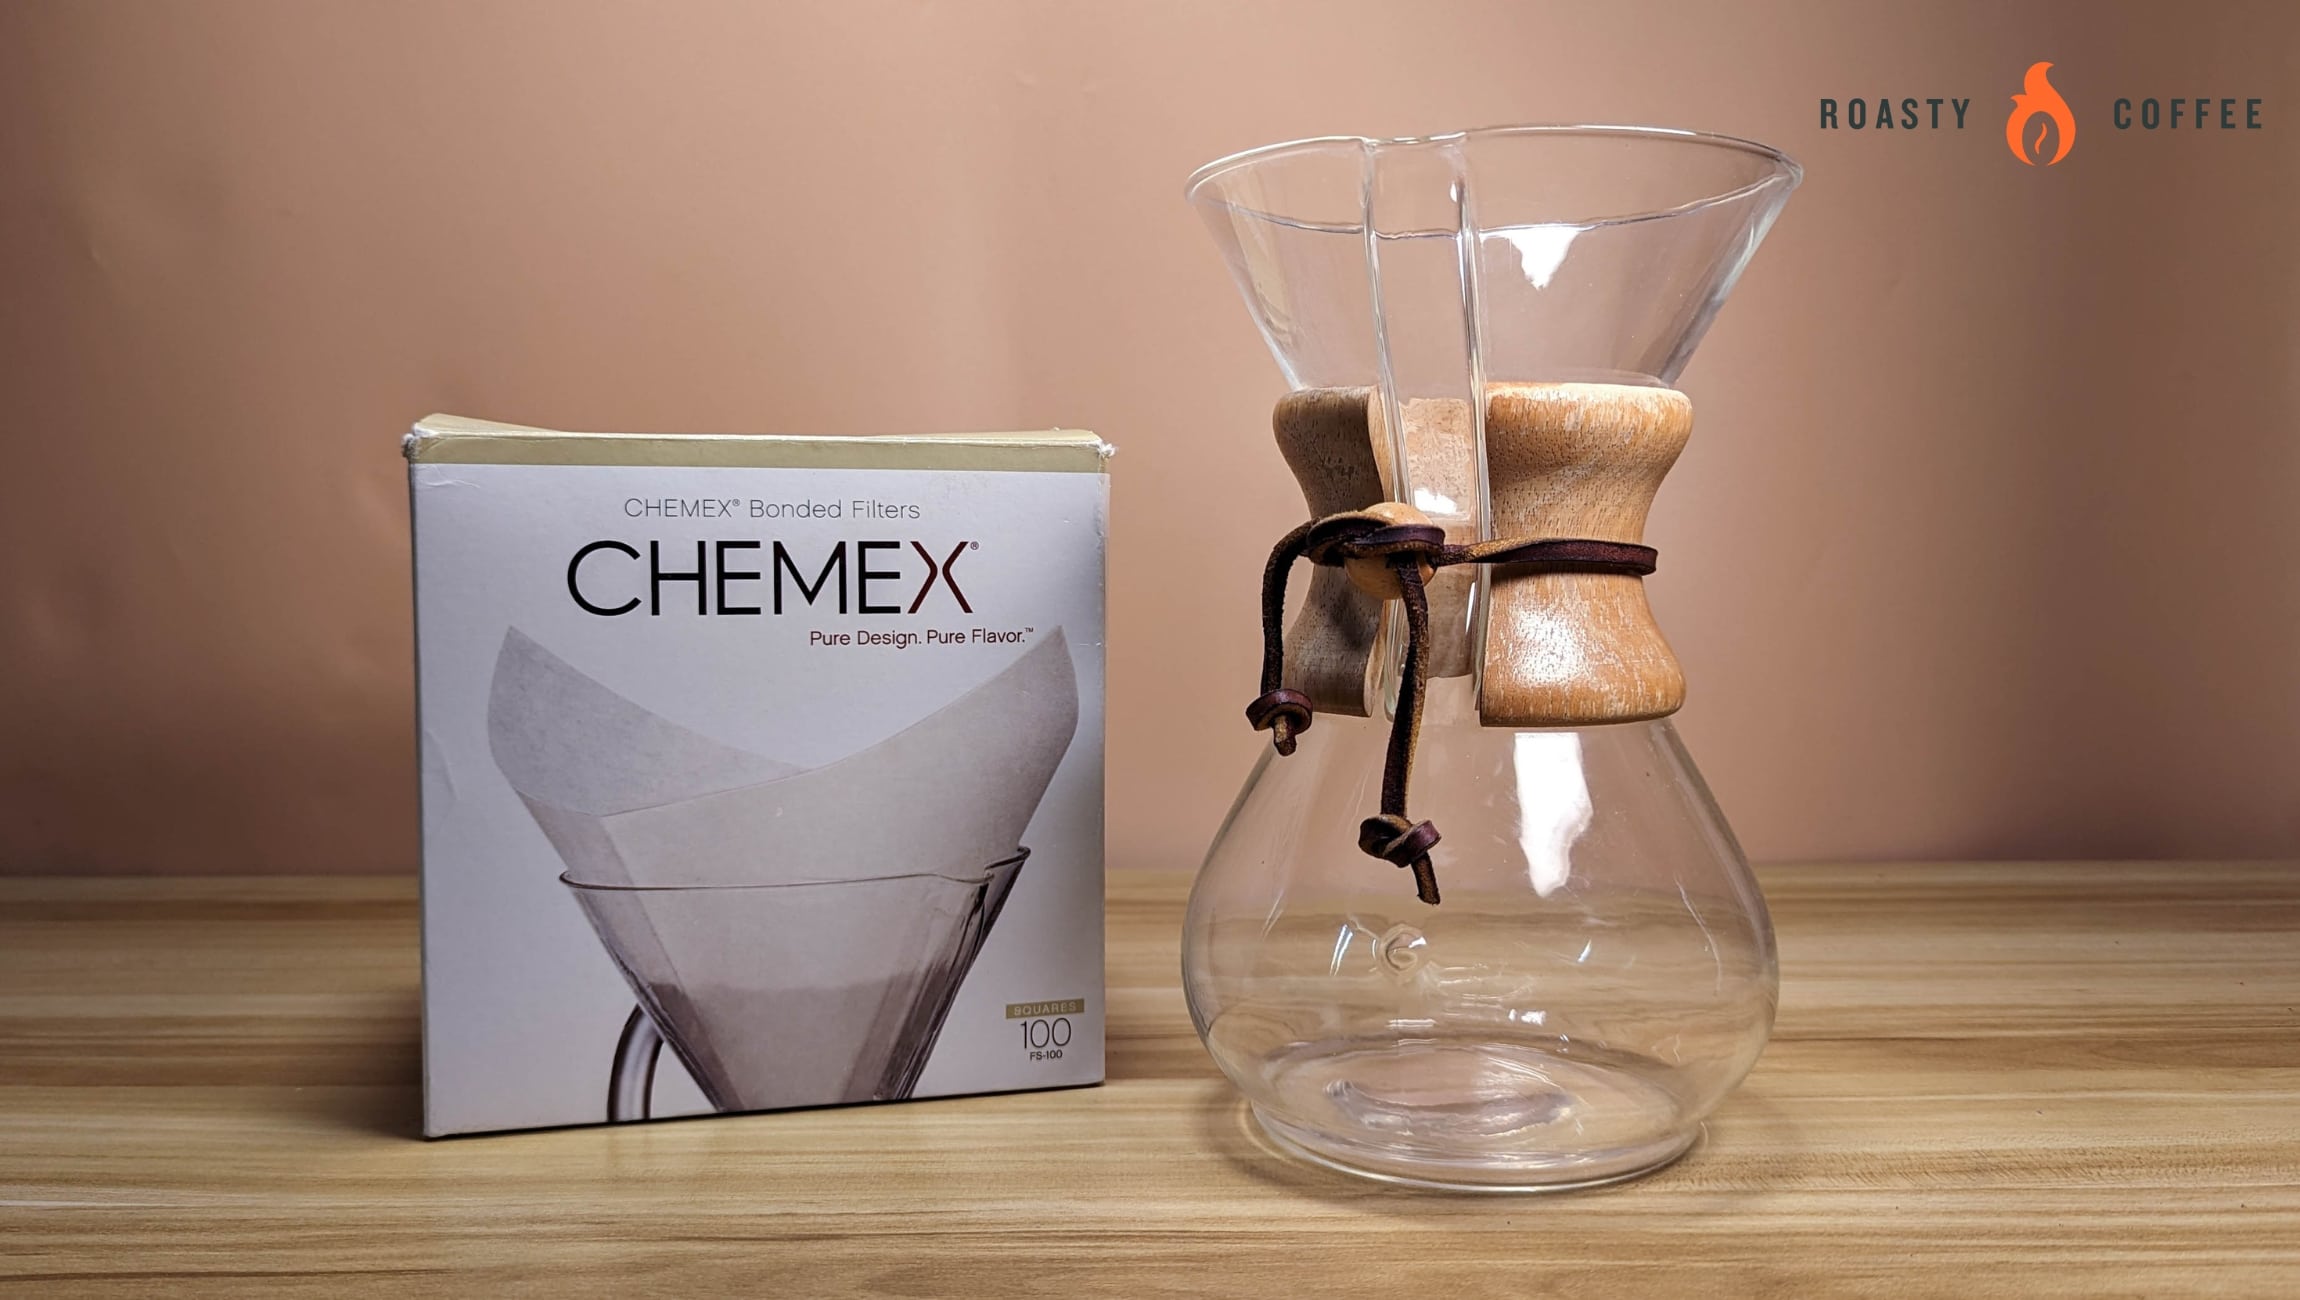 Chemex and Filter Box